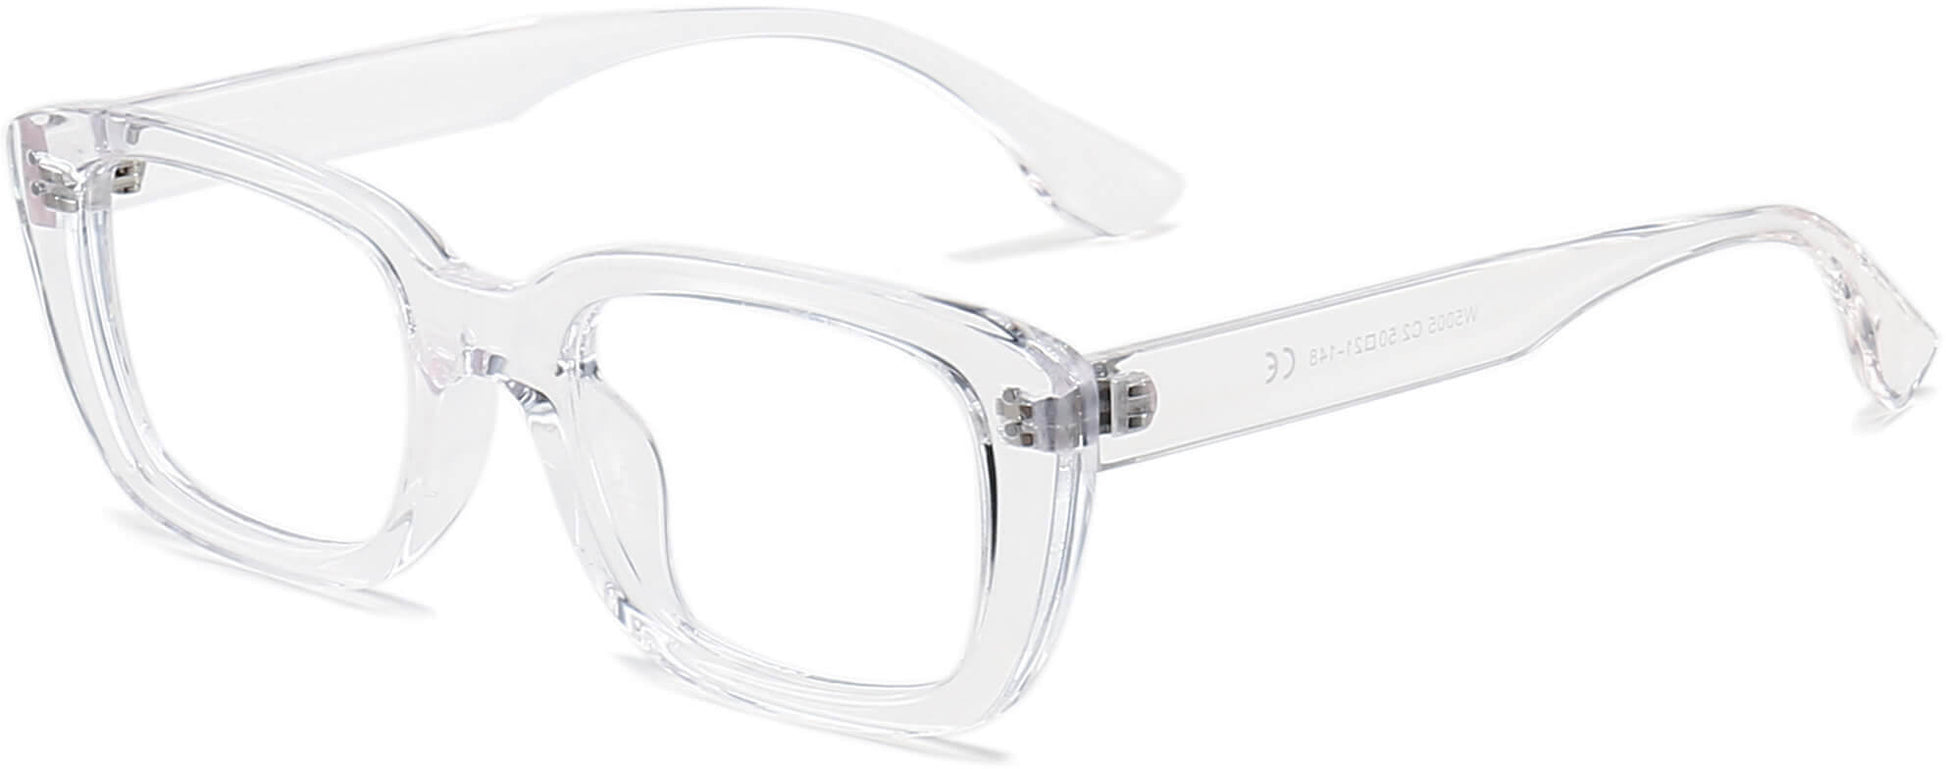 Sage Rectangle Clear Eyeglasses from ANRRI, angle view